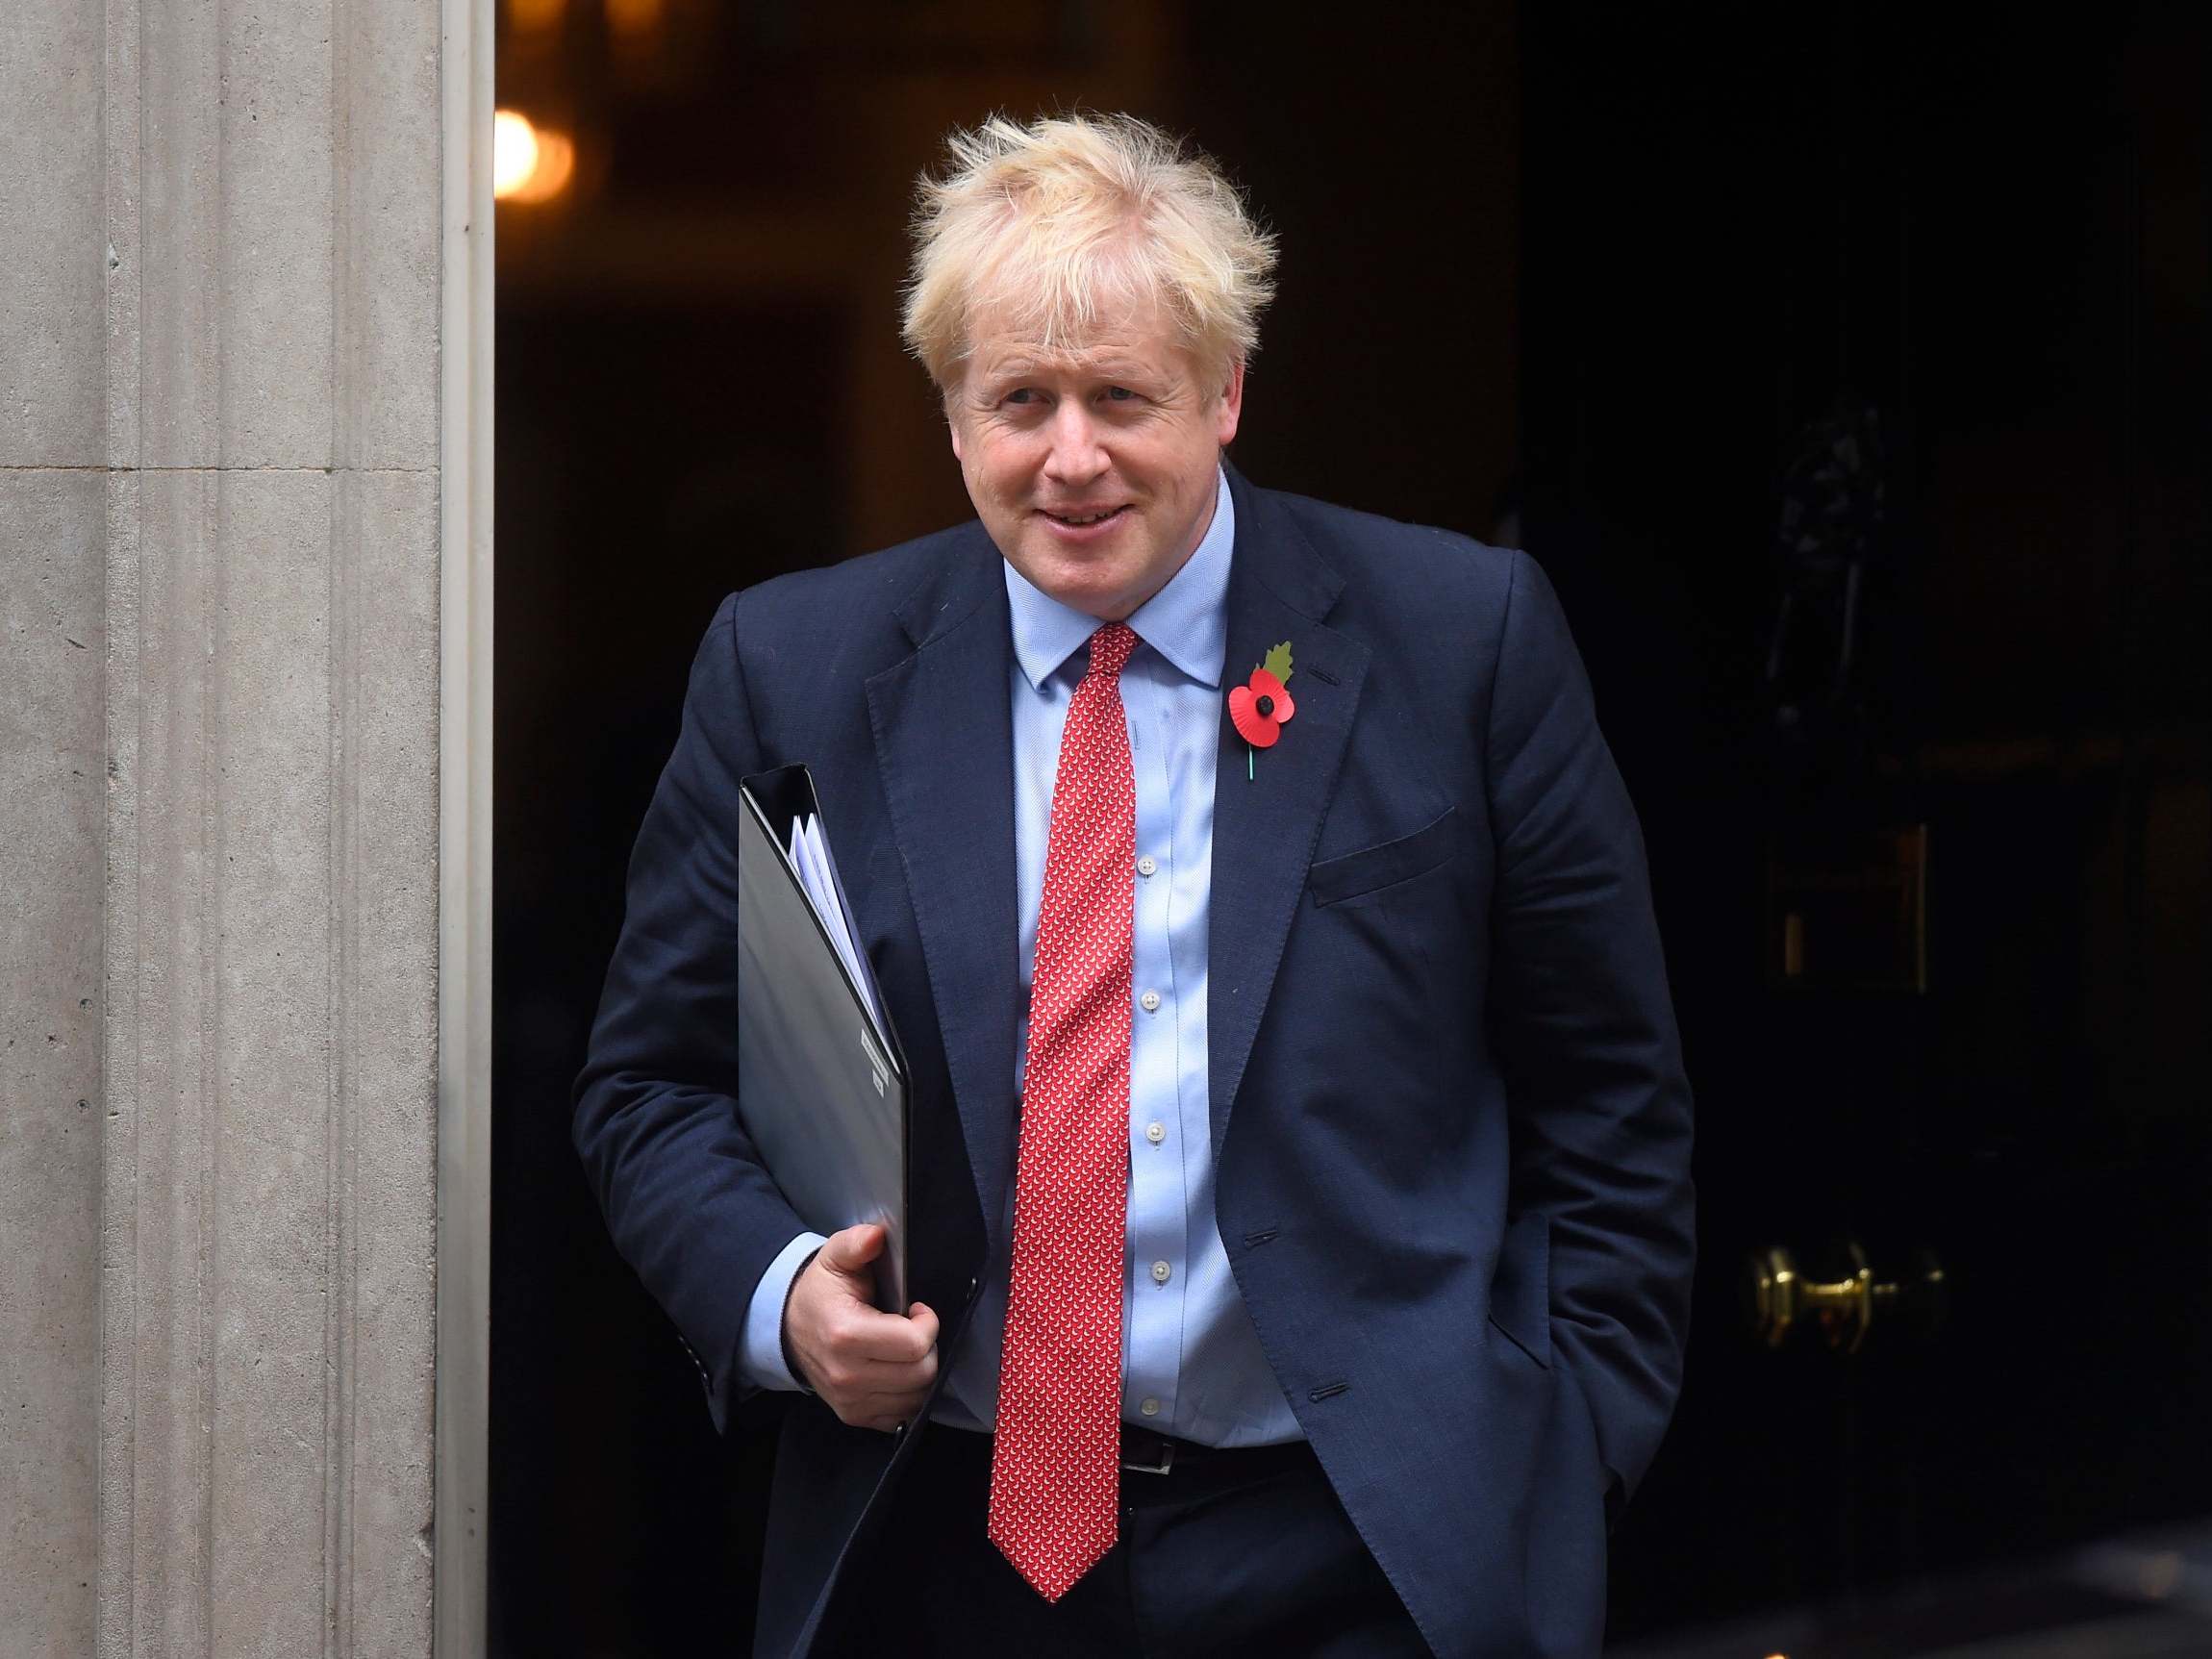 Boris Johnson said leaving the EU on 31 October was 'do or die'